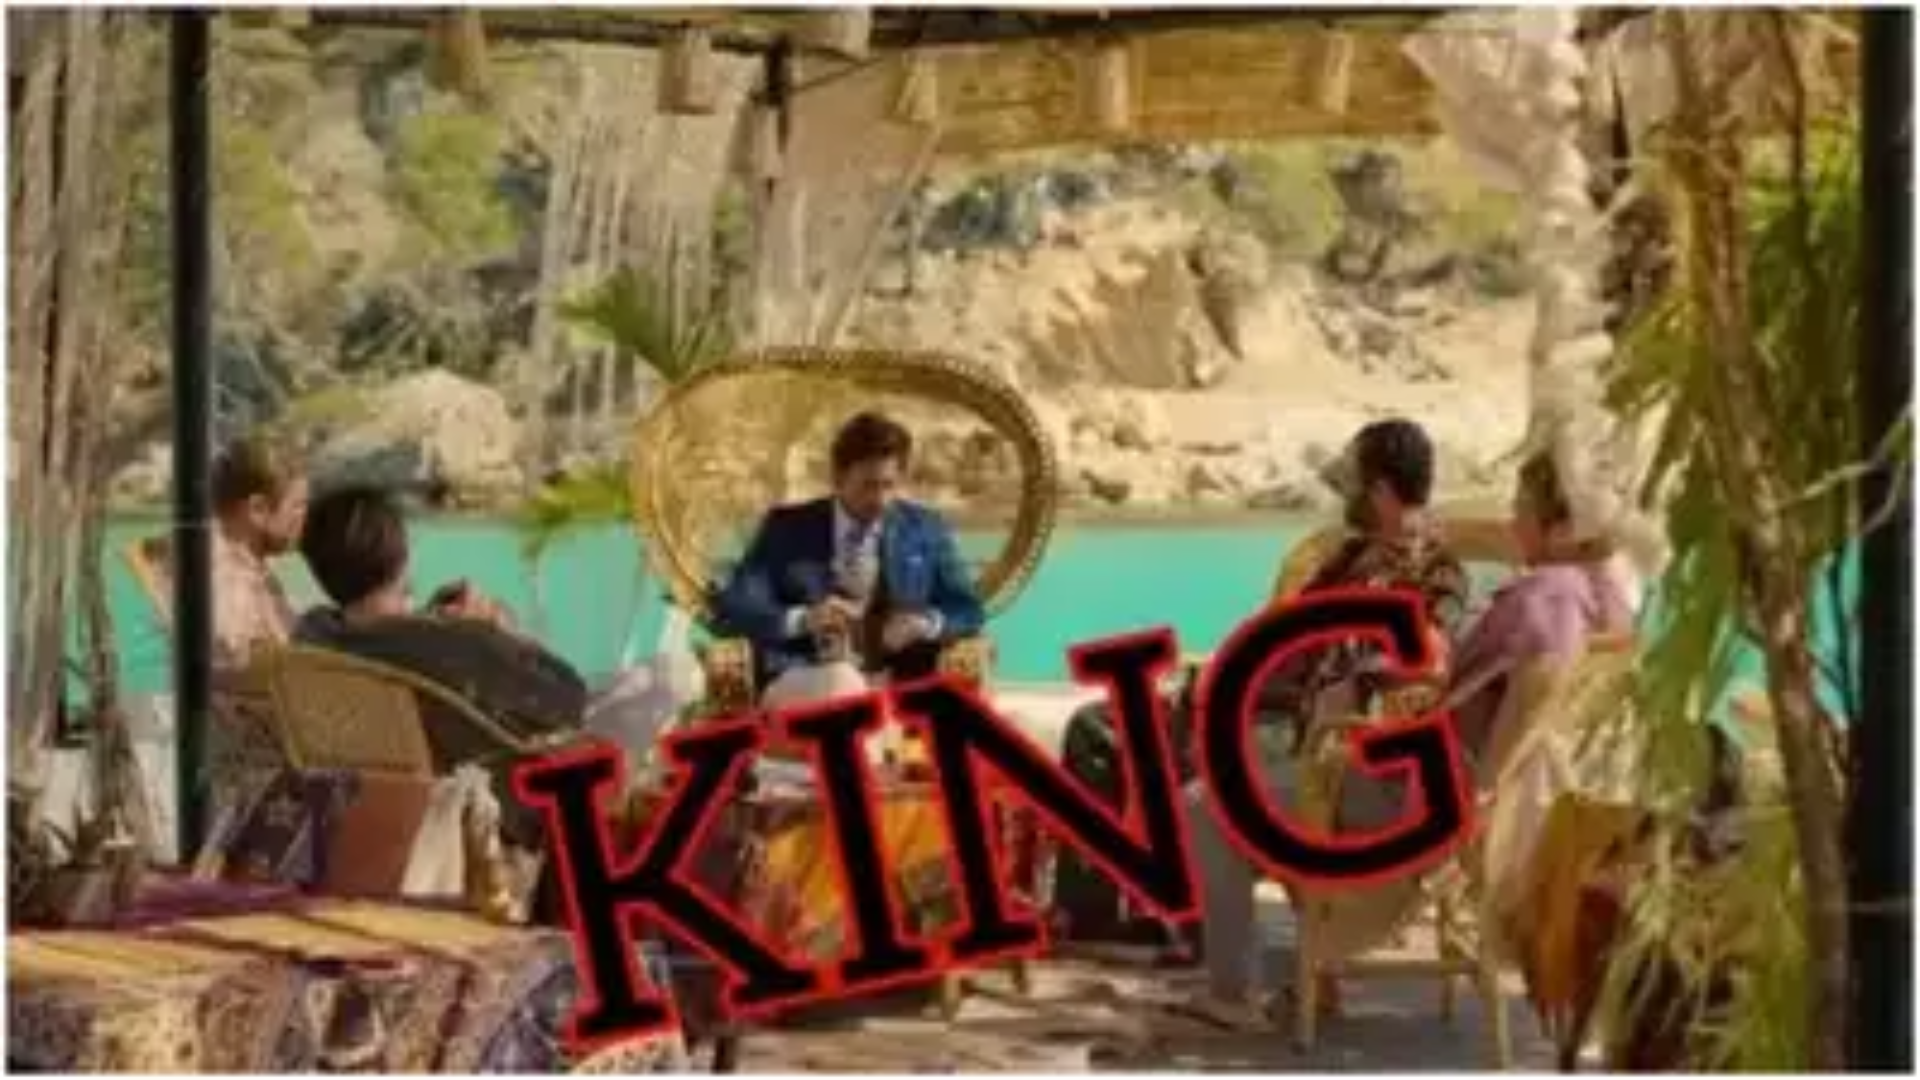 Shah Rukh Khan Shooting In Spain For King, Checkout Leaked Pictures